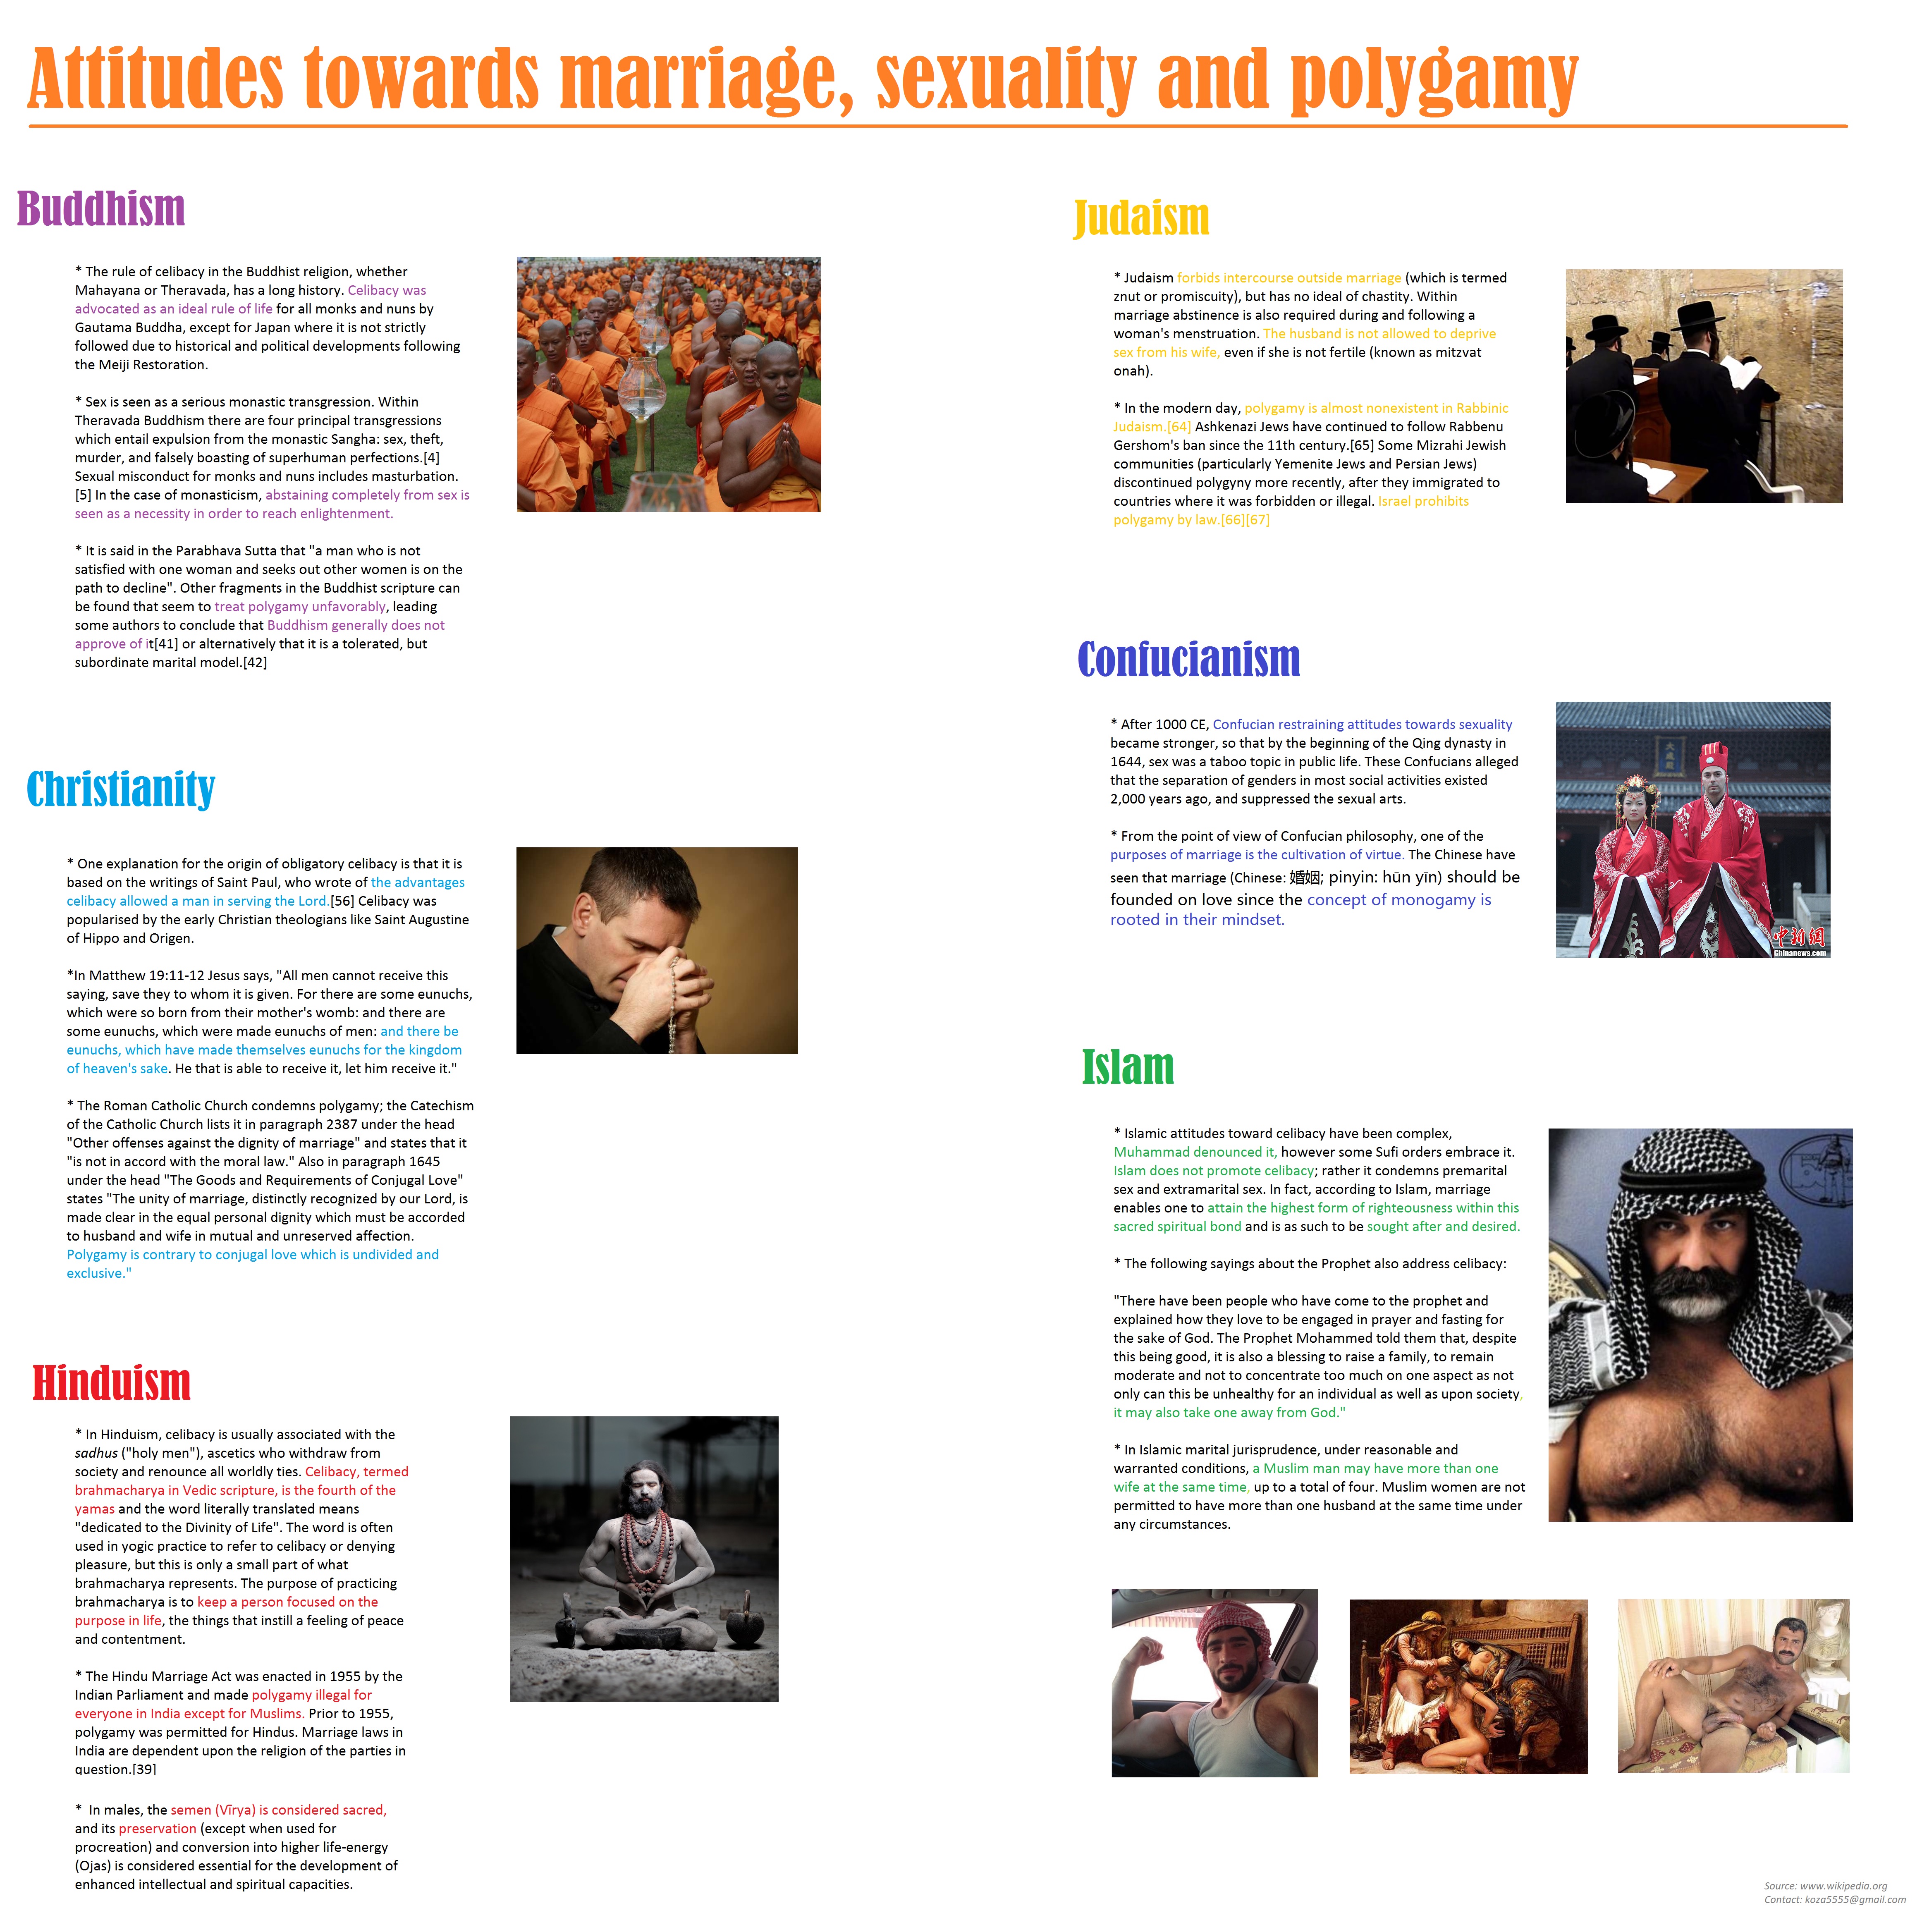 Religion And Sexuality